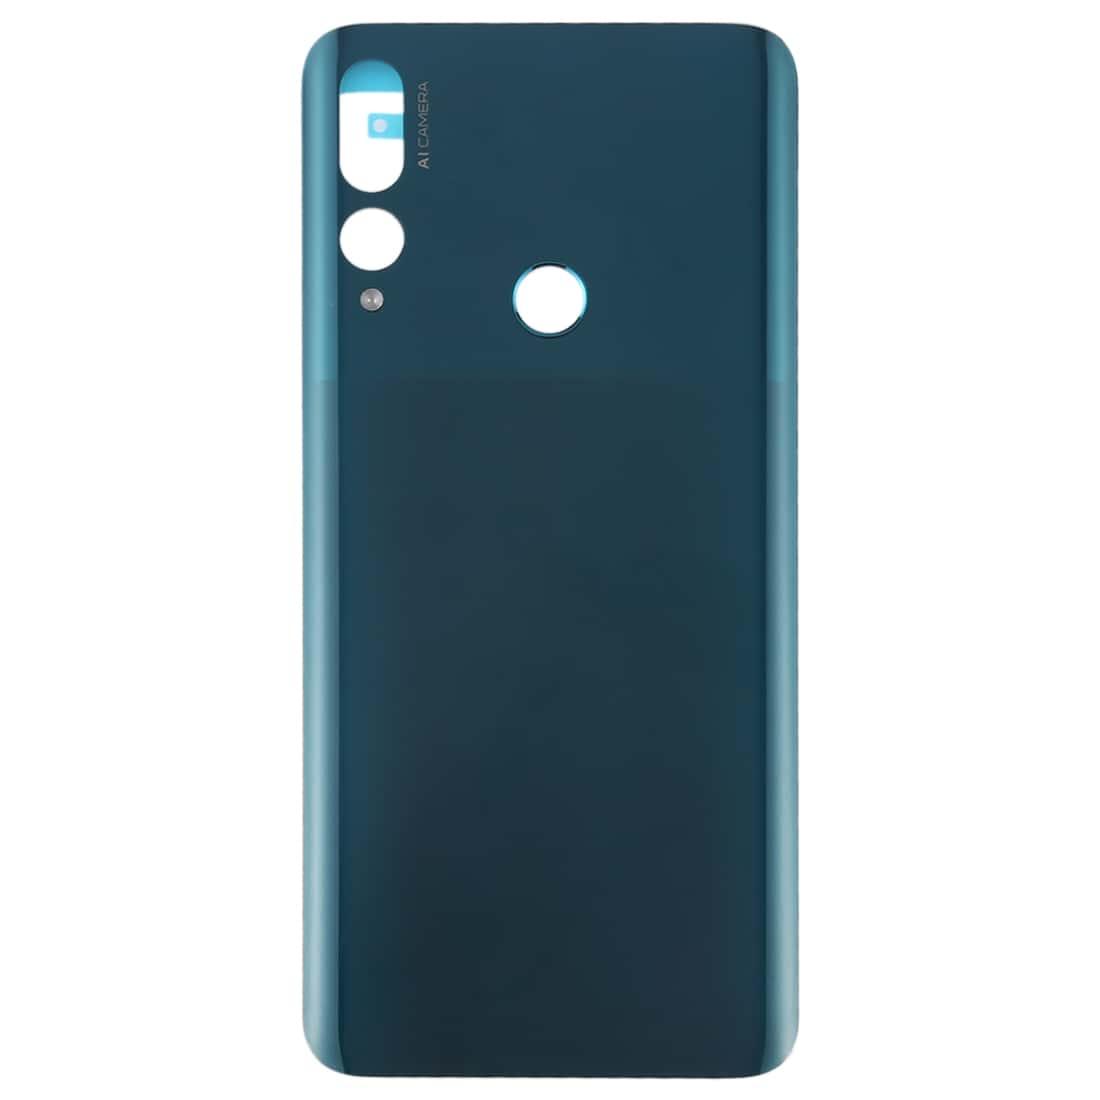 Back Panel Housing Body for Huawei Y9 Prime 2019 Green